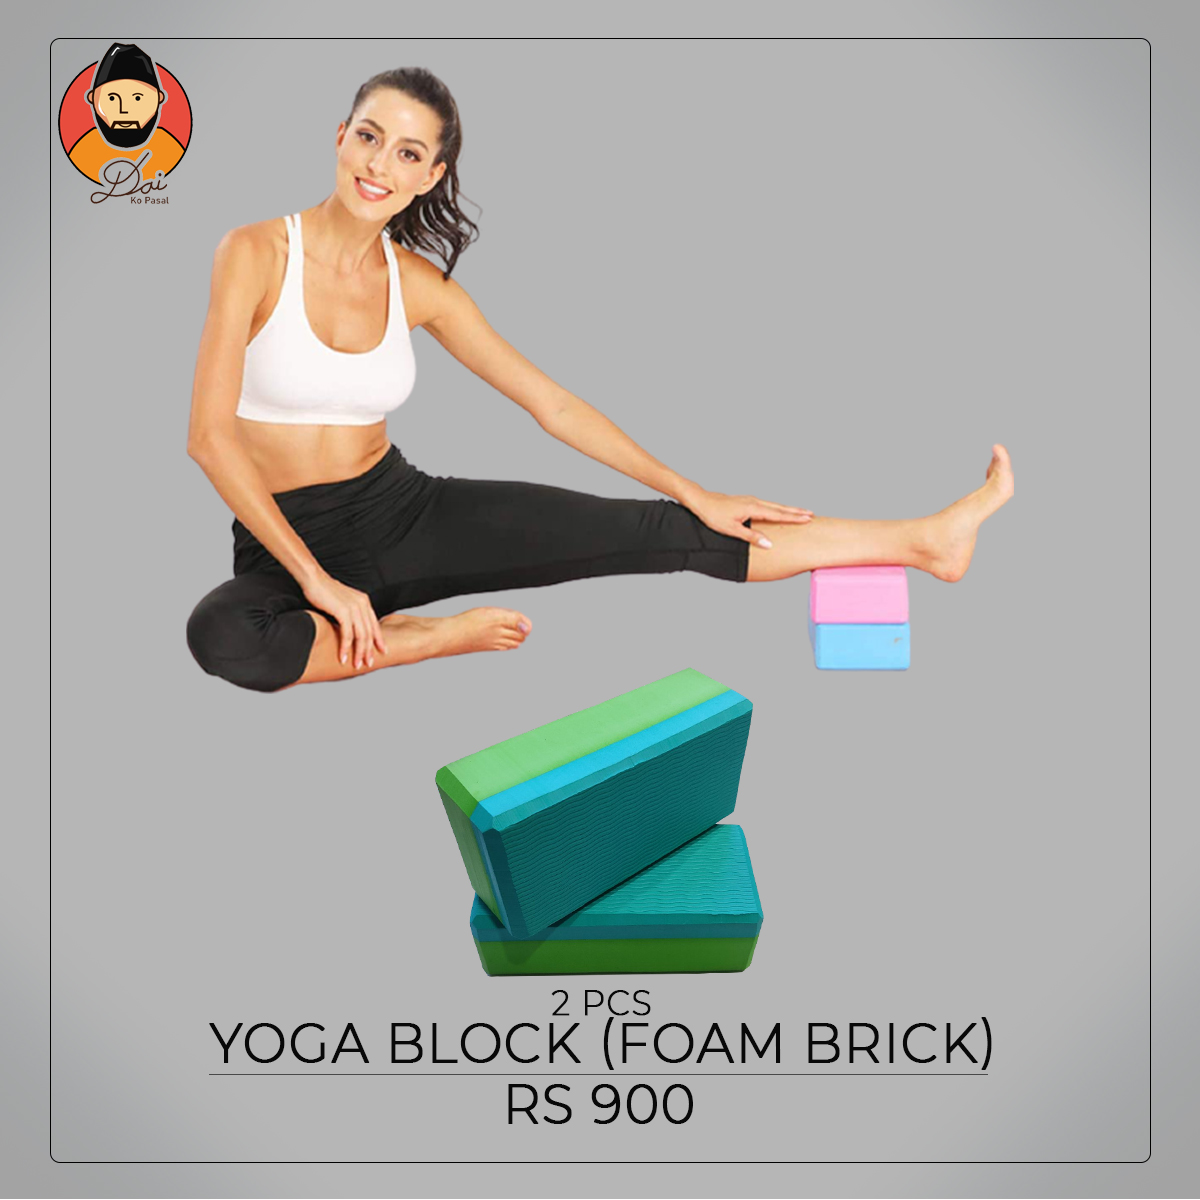 Foam Yoga Block /Pillow Brick - Improve Yoga posture - PAIR, Online  Shopping in Nepal, Shop Online, Delivery all over Nepal